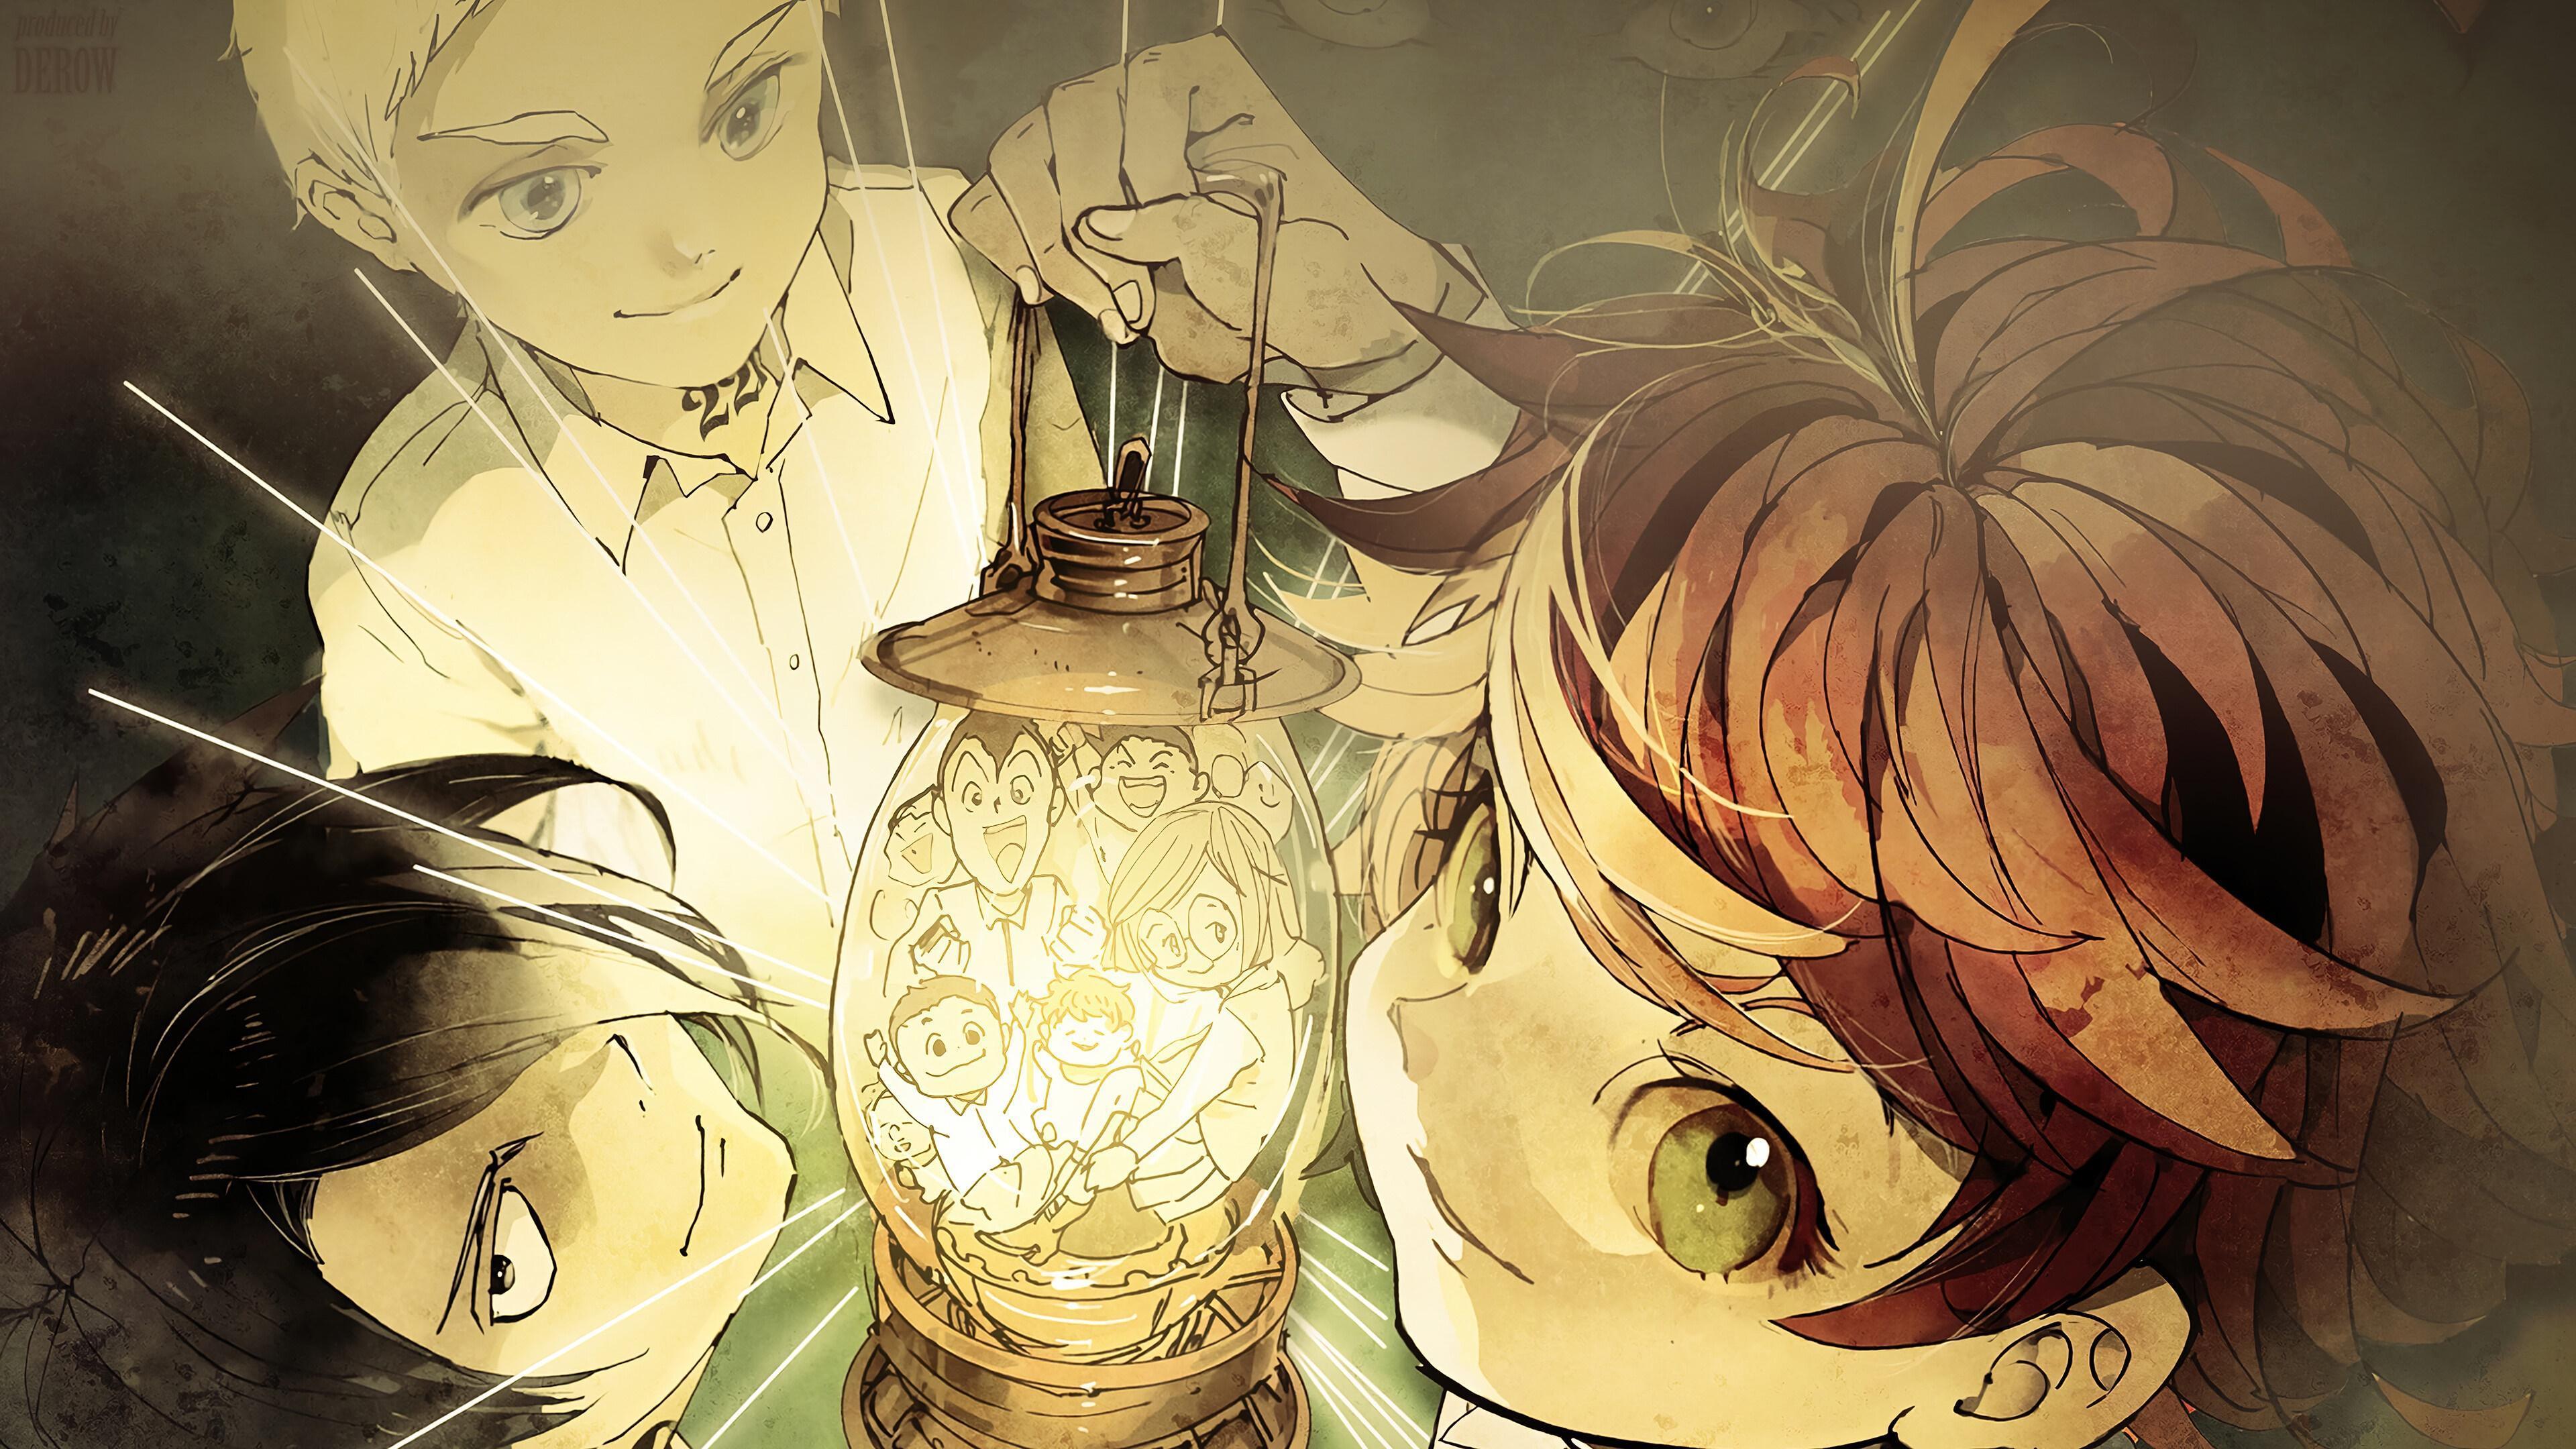 HD wallpaper, Hd, 4K, Emma, The Promised Neverland, Norman, Wallpaper, Ray